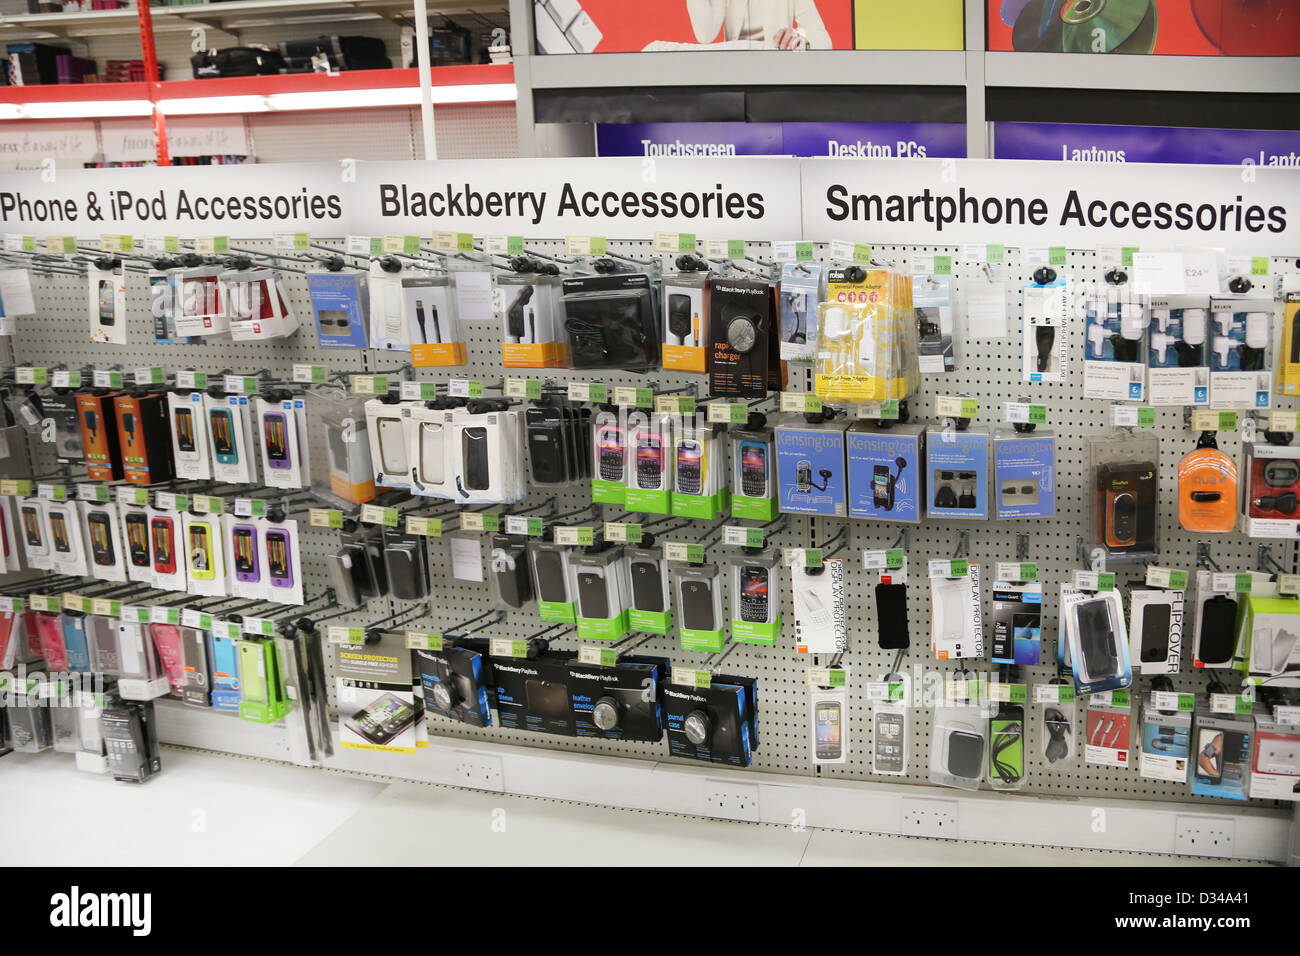 iPhone, iPod, Blackberry And Smartphone Accessories On Sale In Shop Stock  Photo - Alamy